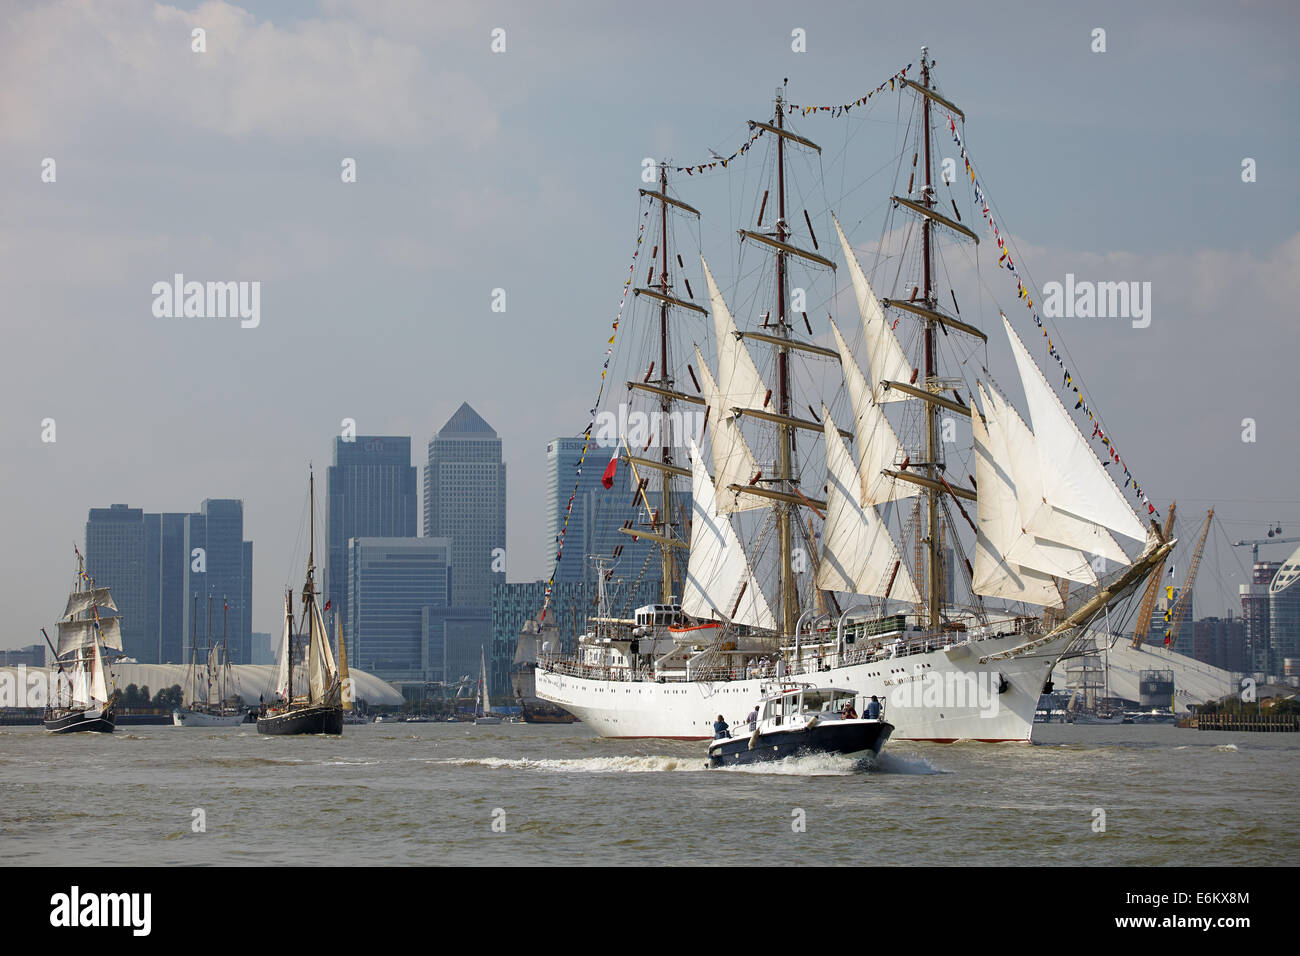 London, UK. 9th Sep, 2014. The Dar Mlodziezy, the largest ship taking part in the Tall ships Regatta in Greenwich, leads 'The Parade of Sail' out of London at the end of the four day regatta. Credit:  Steve Hickey/Alamy Live News Stock Photo